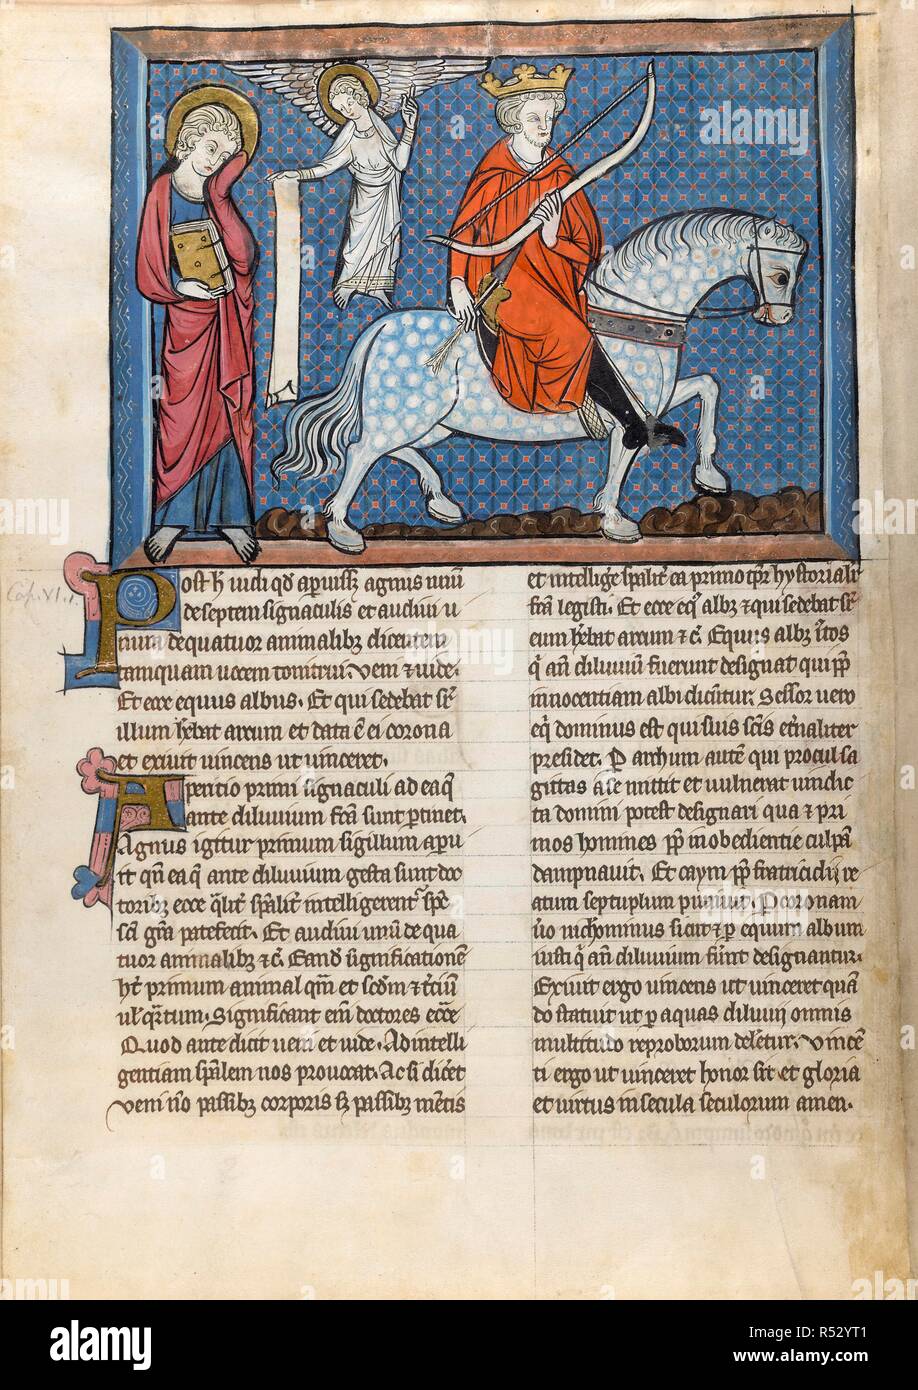 The Rider on White Horse. Apocalypse. 14th century. [Whole folio] The opening of the First Seal. St John, and the Rider on the White Horse, carrying a bow and wearing a crown, introduced by the angel holding a scroll. Book of Revelation, 6, 1-2.  Image taken from Apocalypse.  Originally published/produced in 14th century. . Source: Add. 22493, f.1v. Language: Latin. Stock Photo